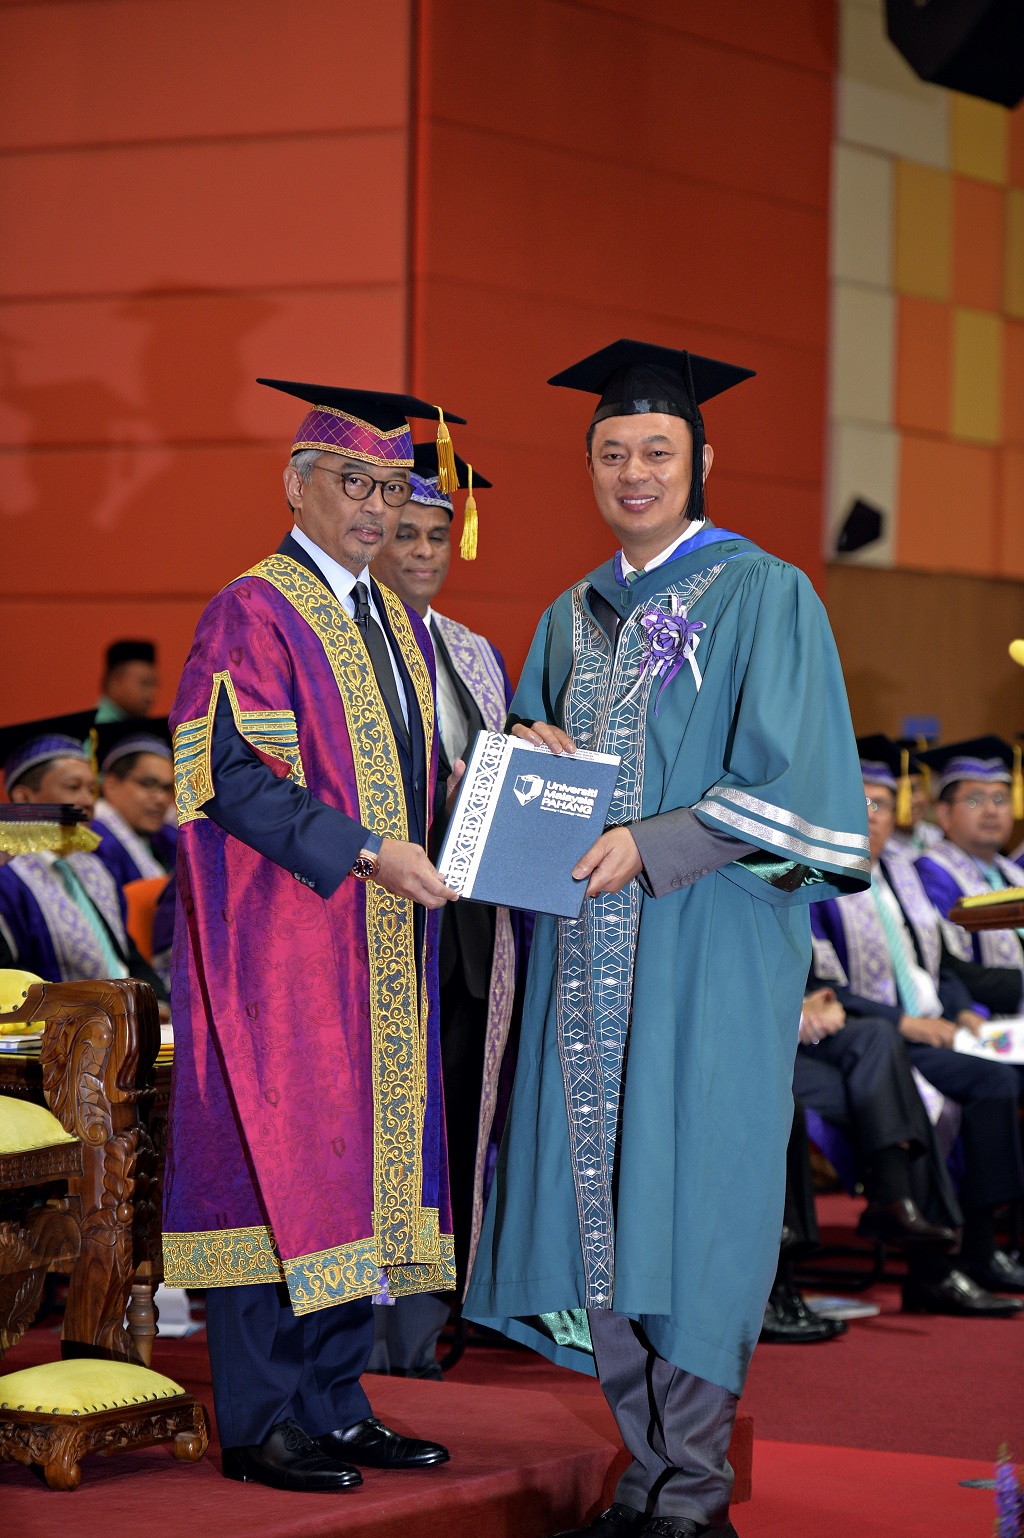 Sultan Pahang’s Brother conferred with UMP Lifelong Professional Learning Award